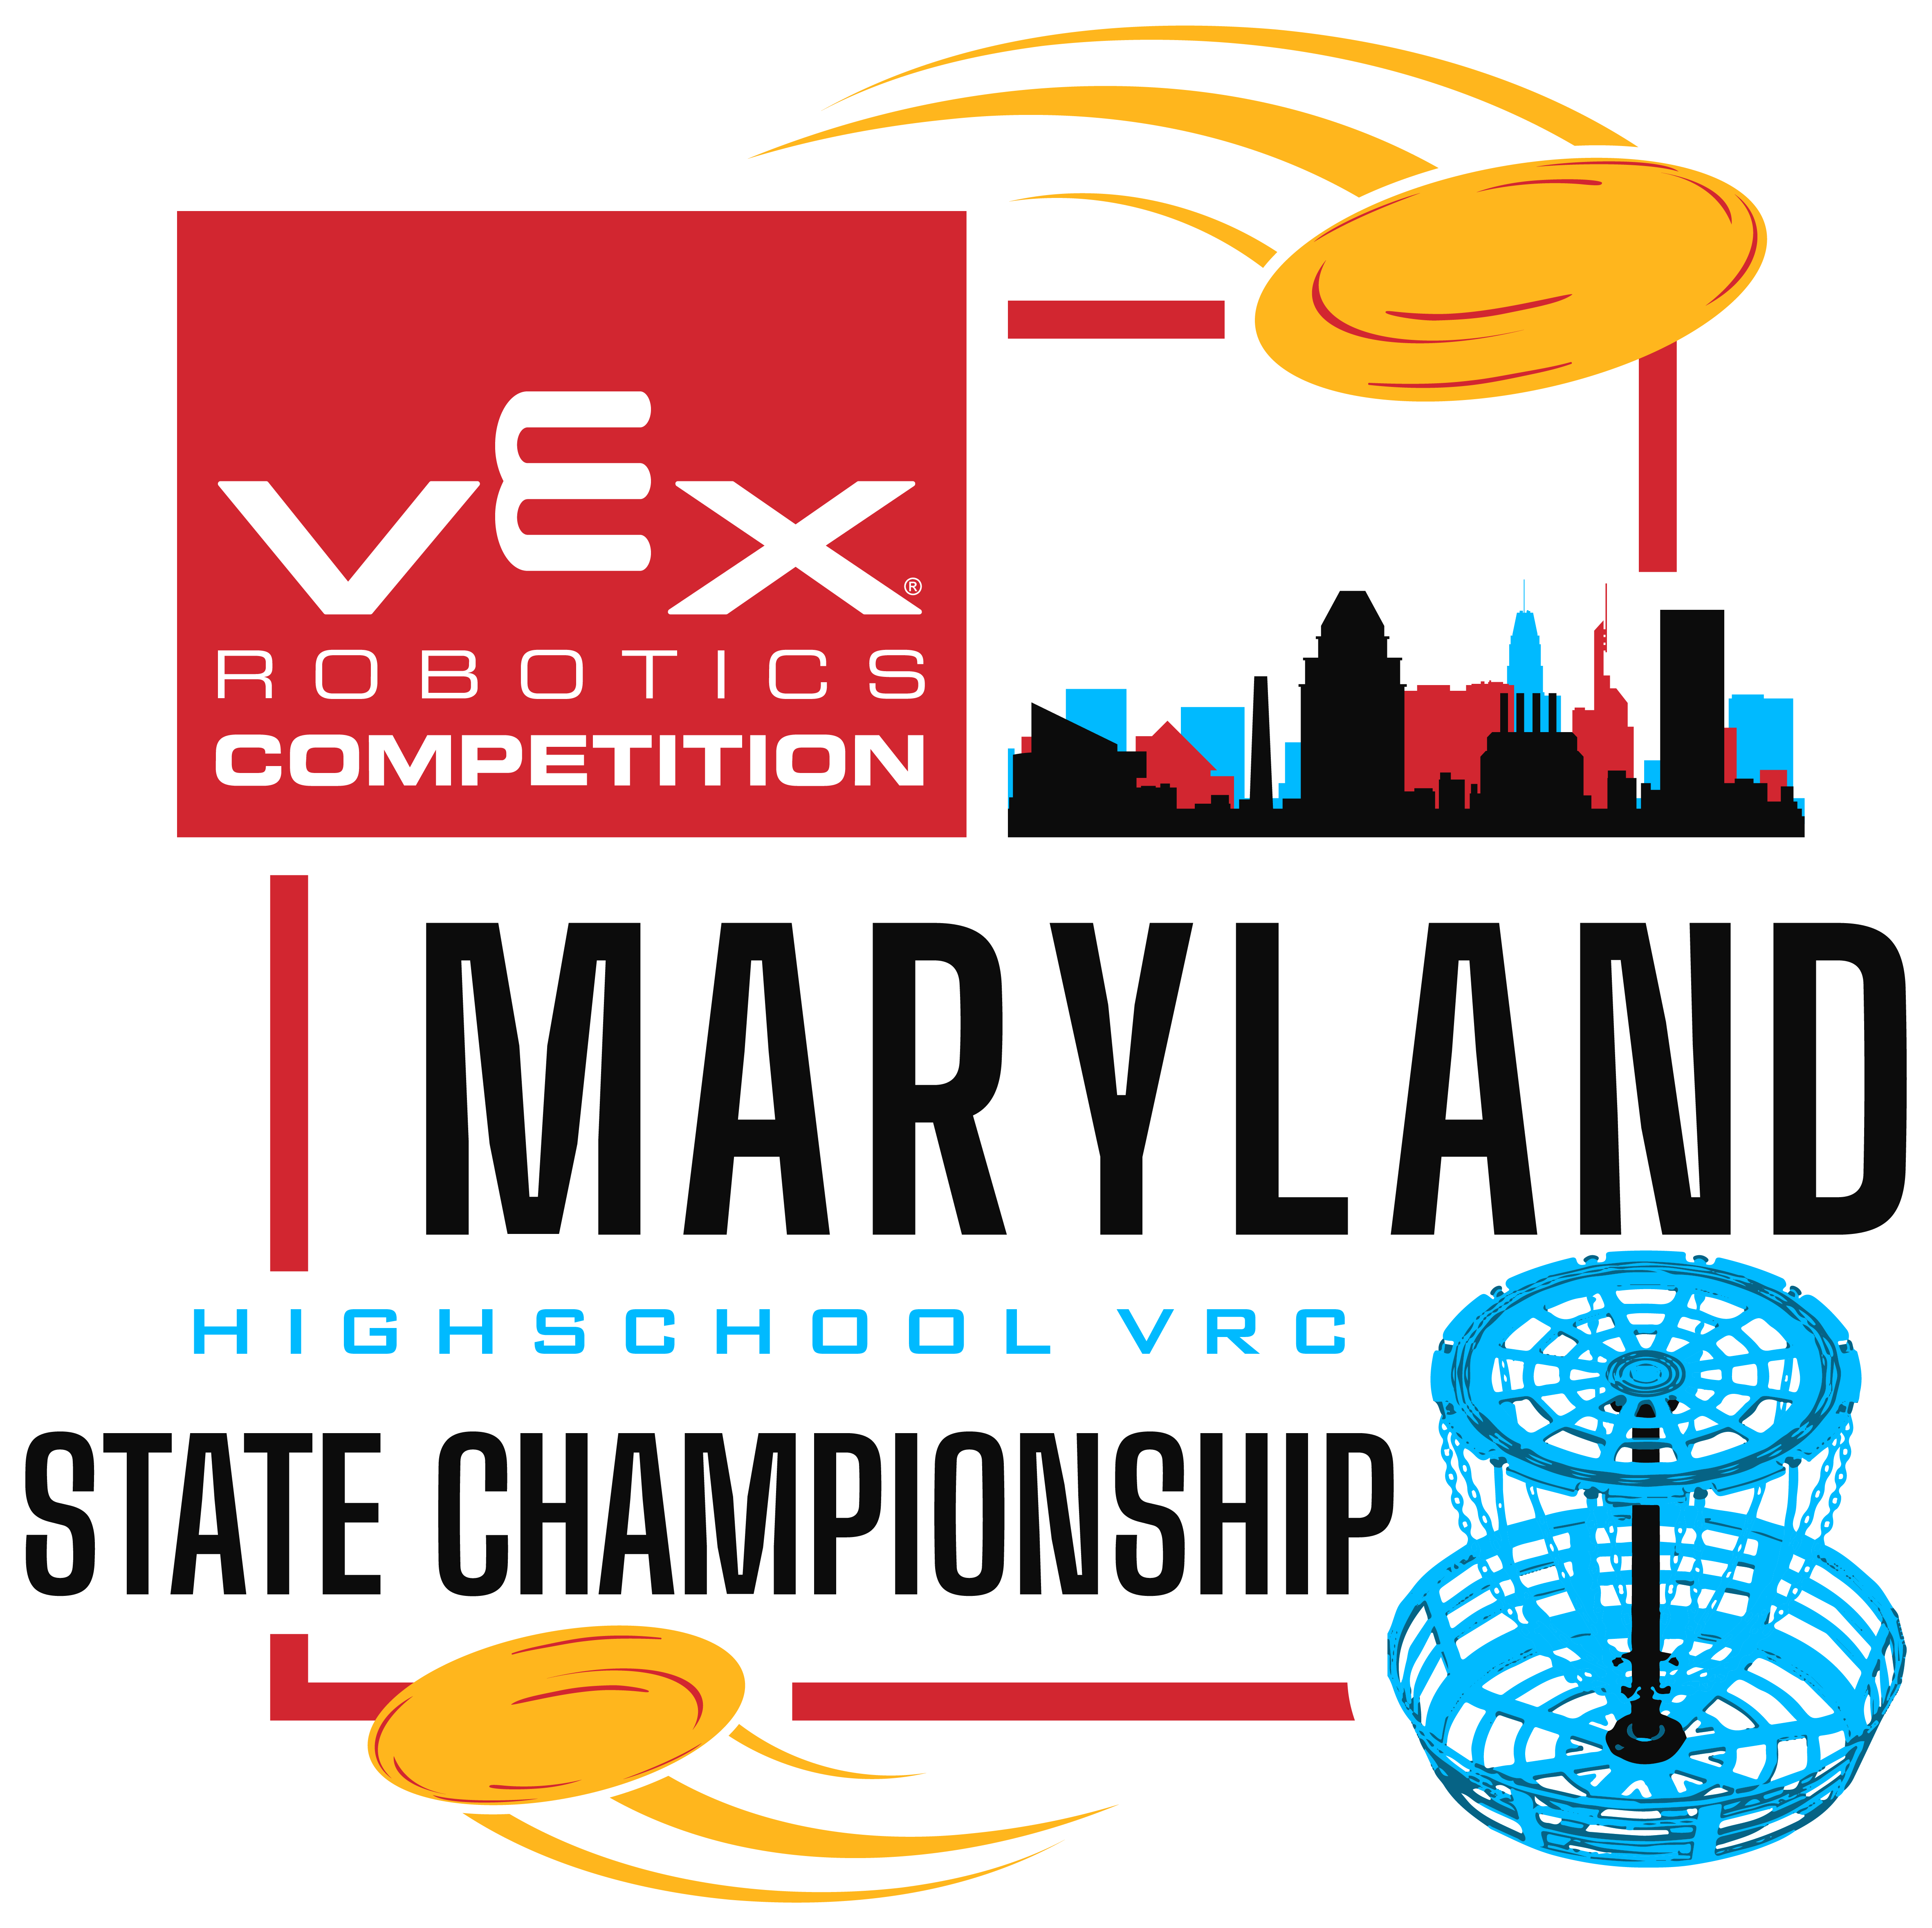 Maryland VRC High School State Championship - Spin Up